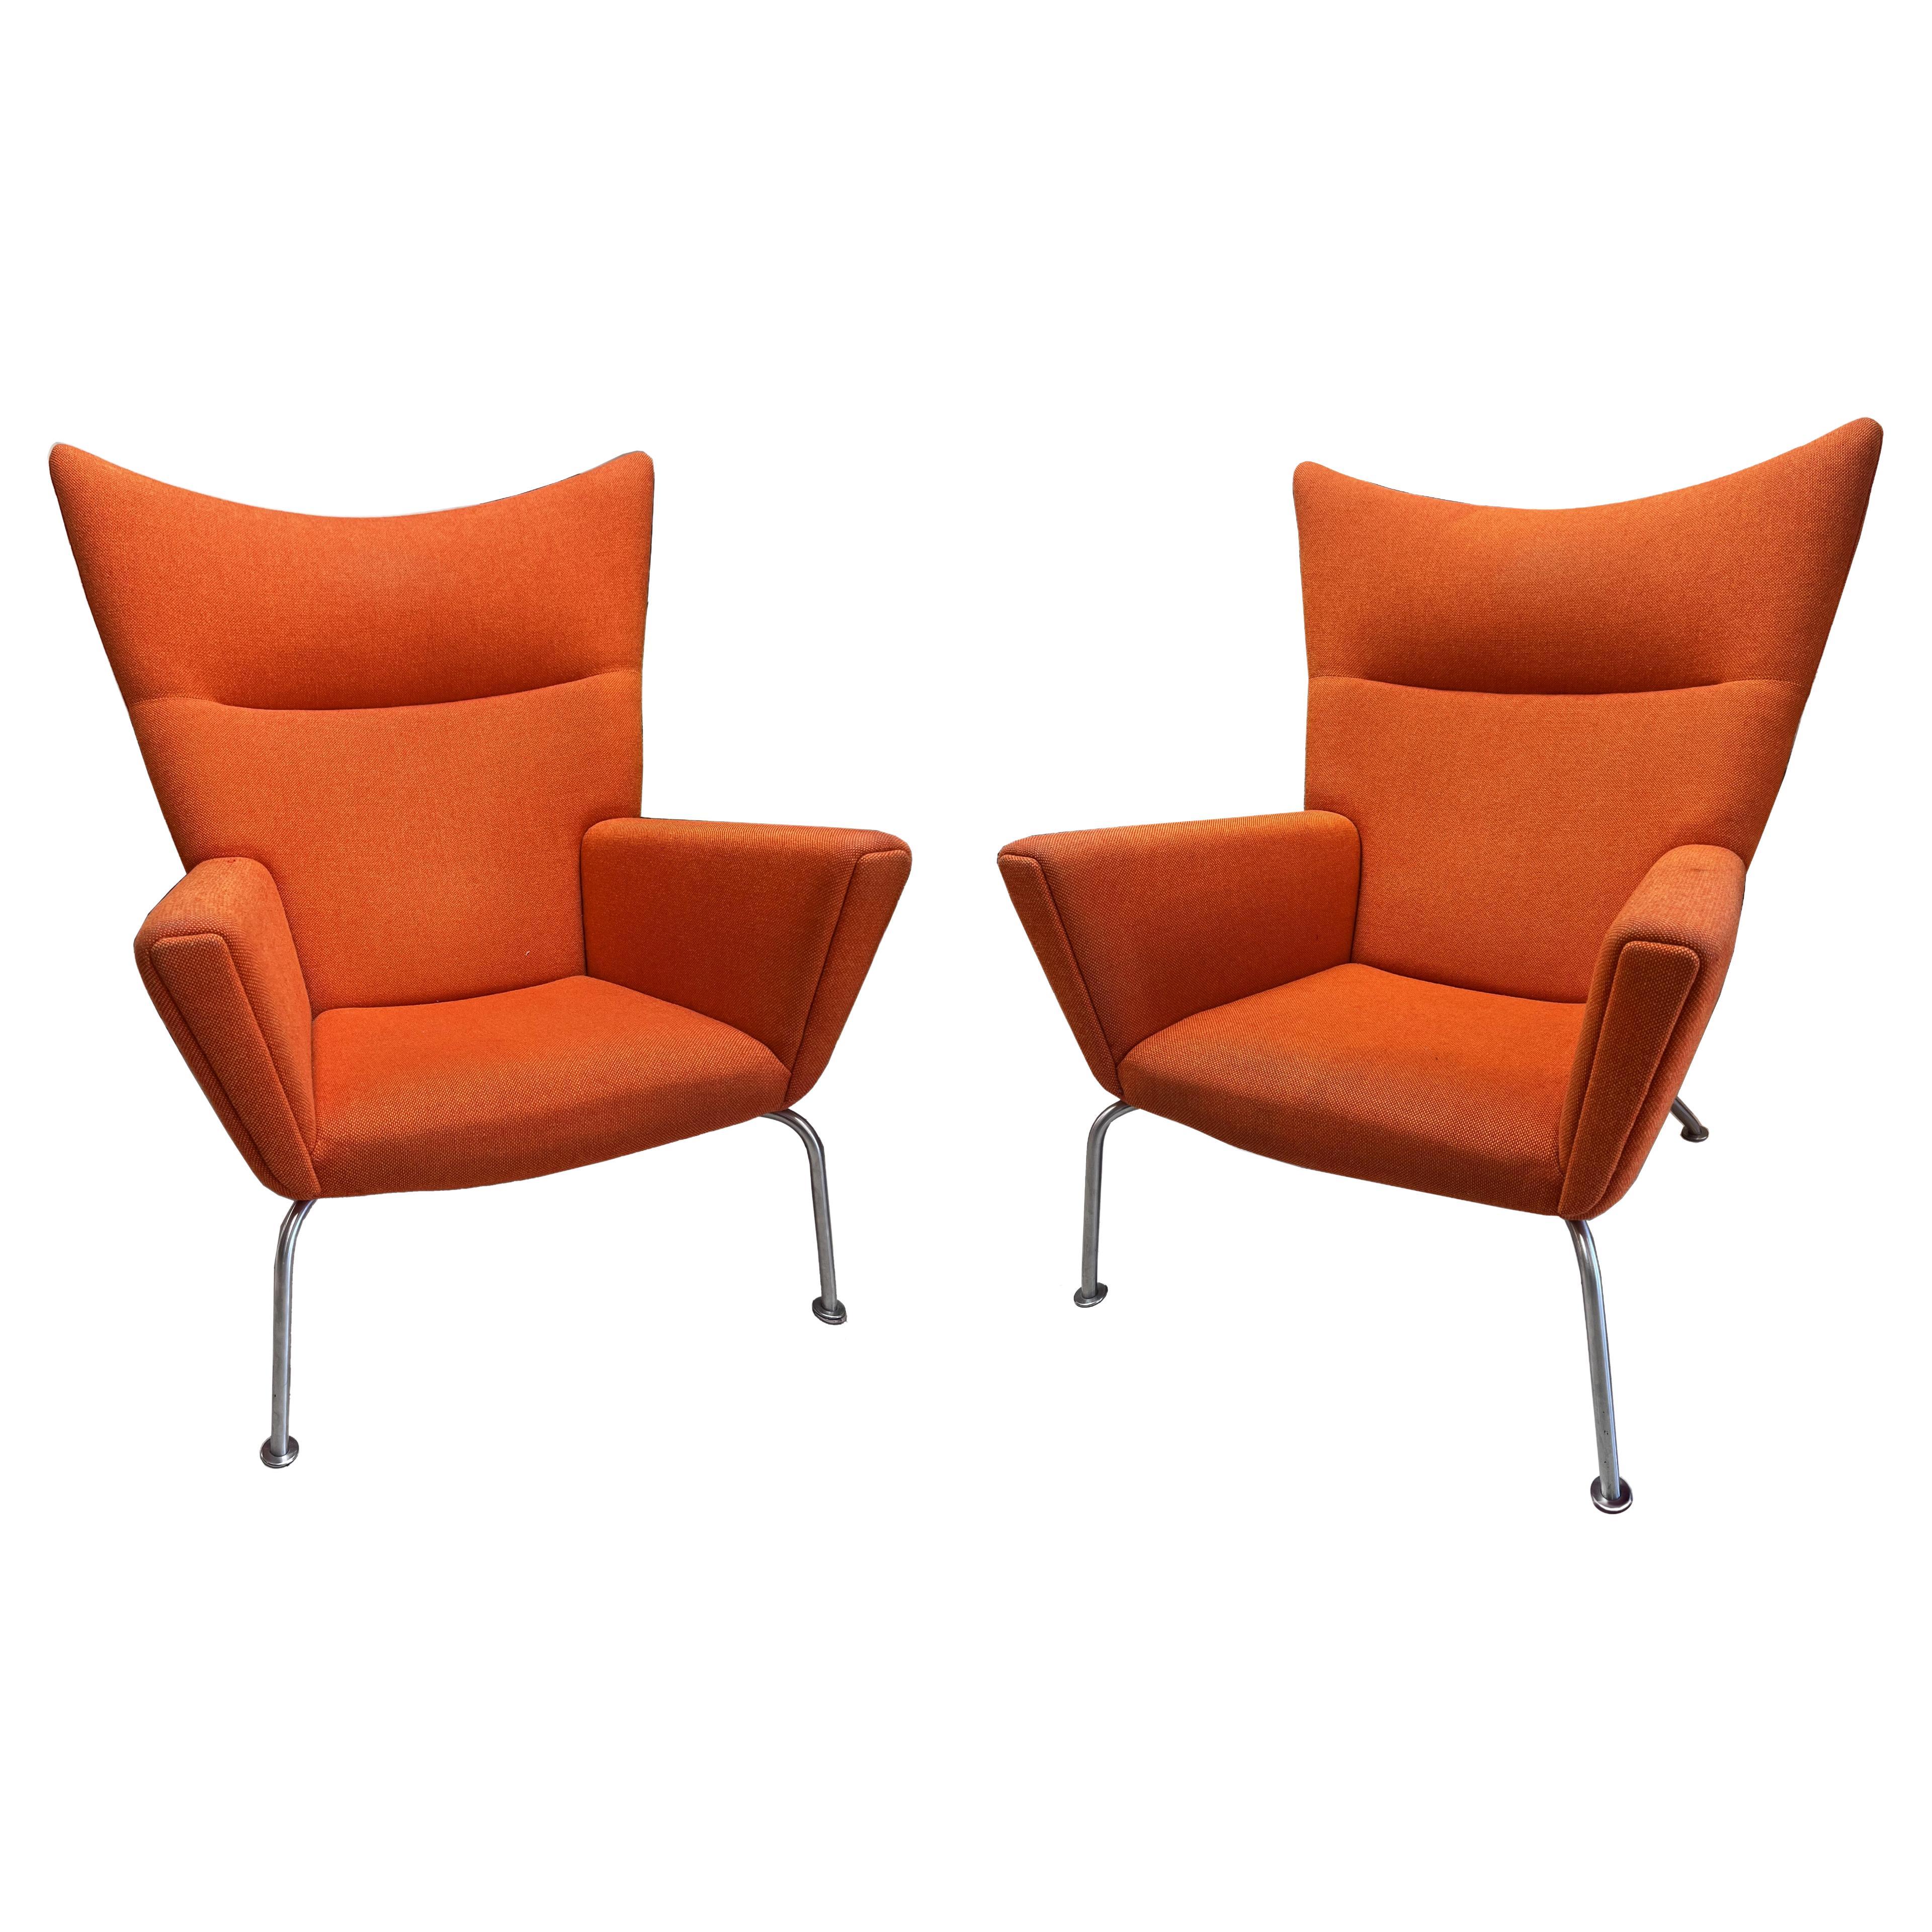 Rare Pair of Early Hans Wegner for Carl Hansen Wing Chairs 